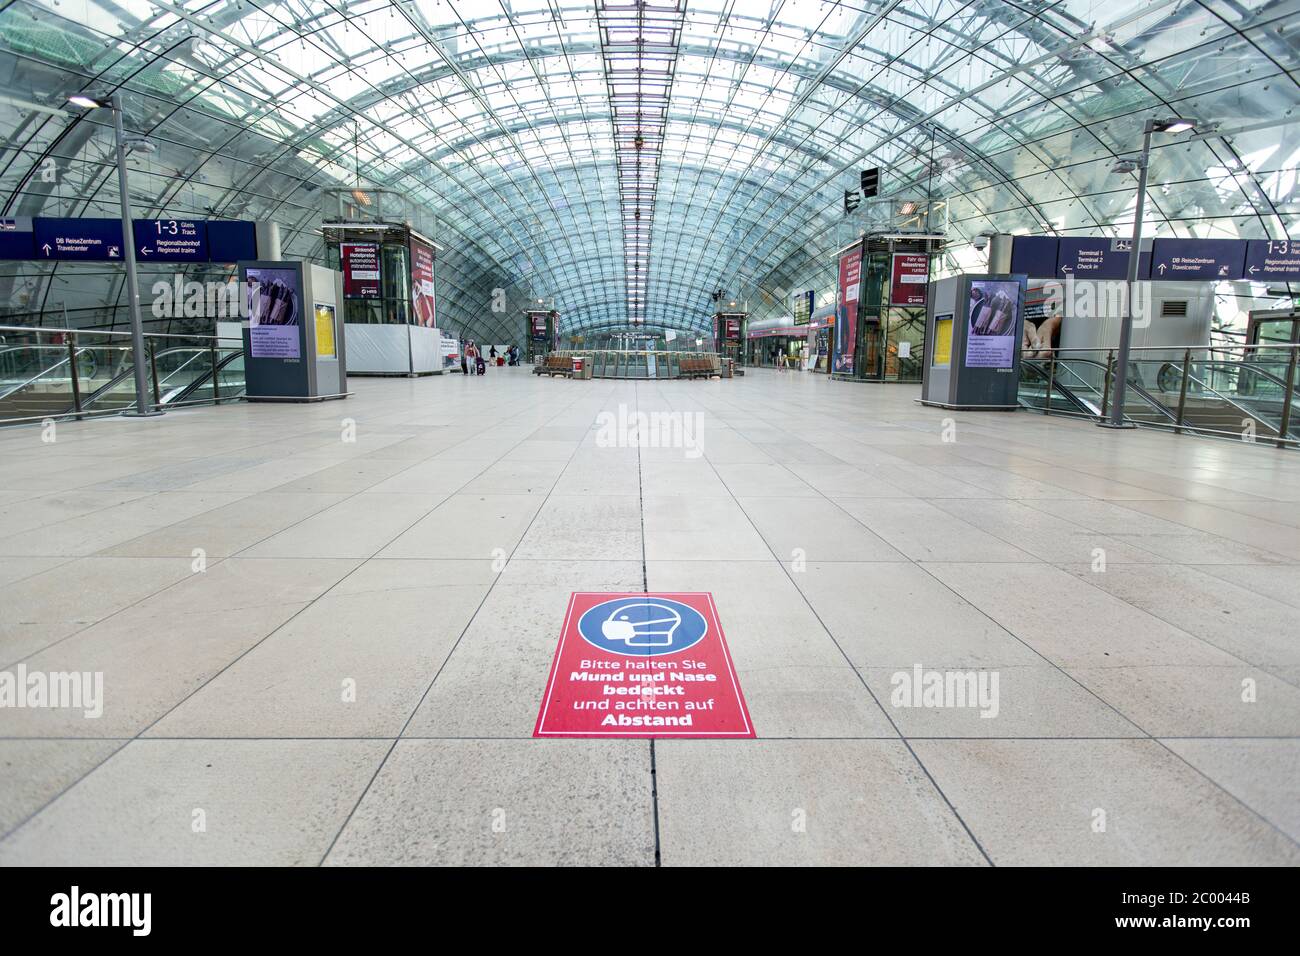 A warning sticker for face masks is glued to the floor inside the nearly empty Frankfurt International Airport during the lockdown caused by the COVID-19 virus. Worldwide, the air traffic industry is heavily impacted by the massive drop in traffic. Stock Photo